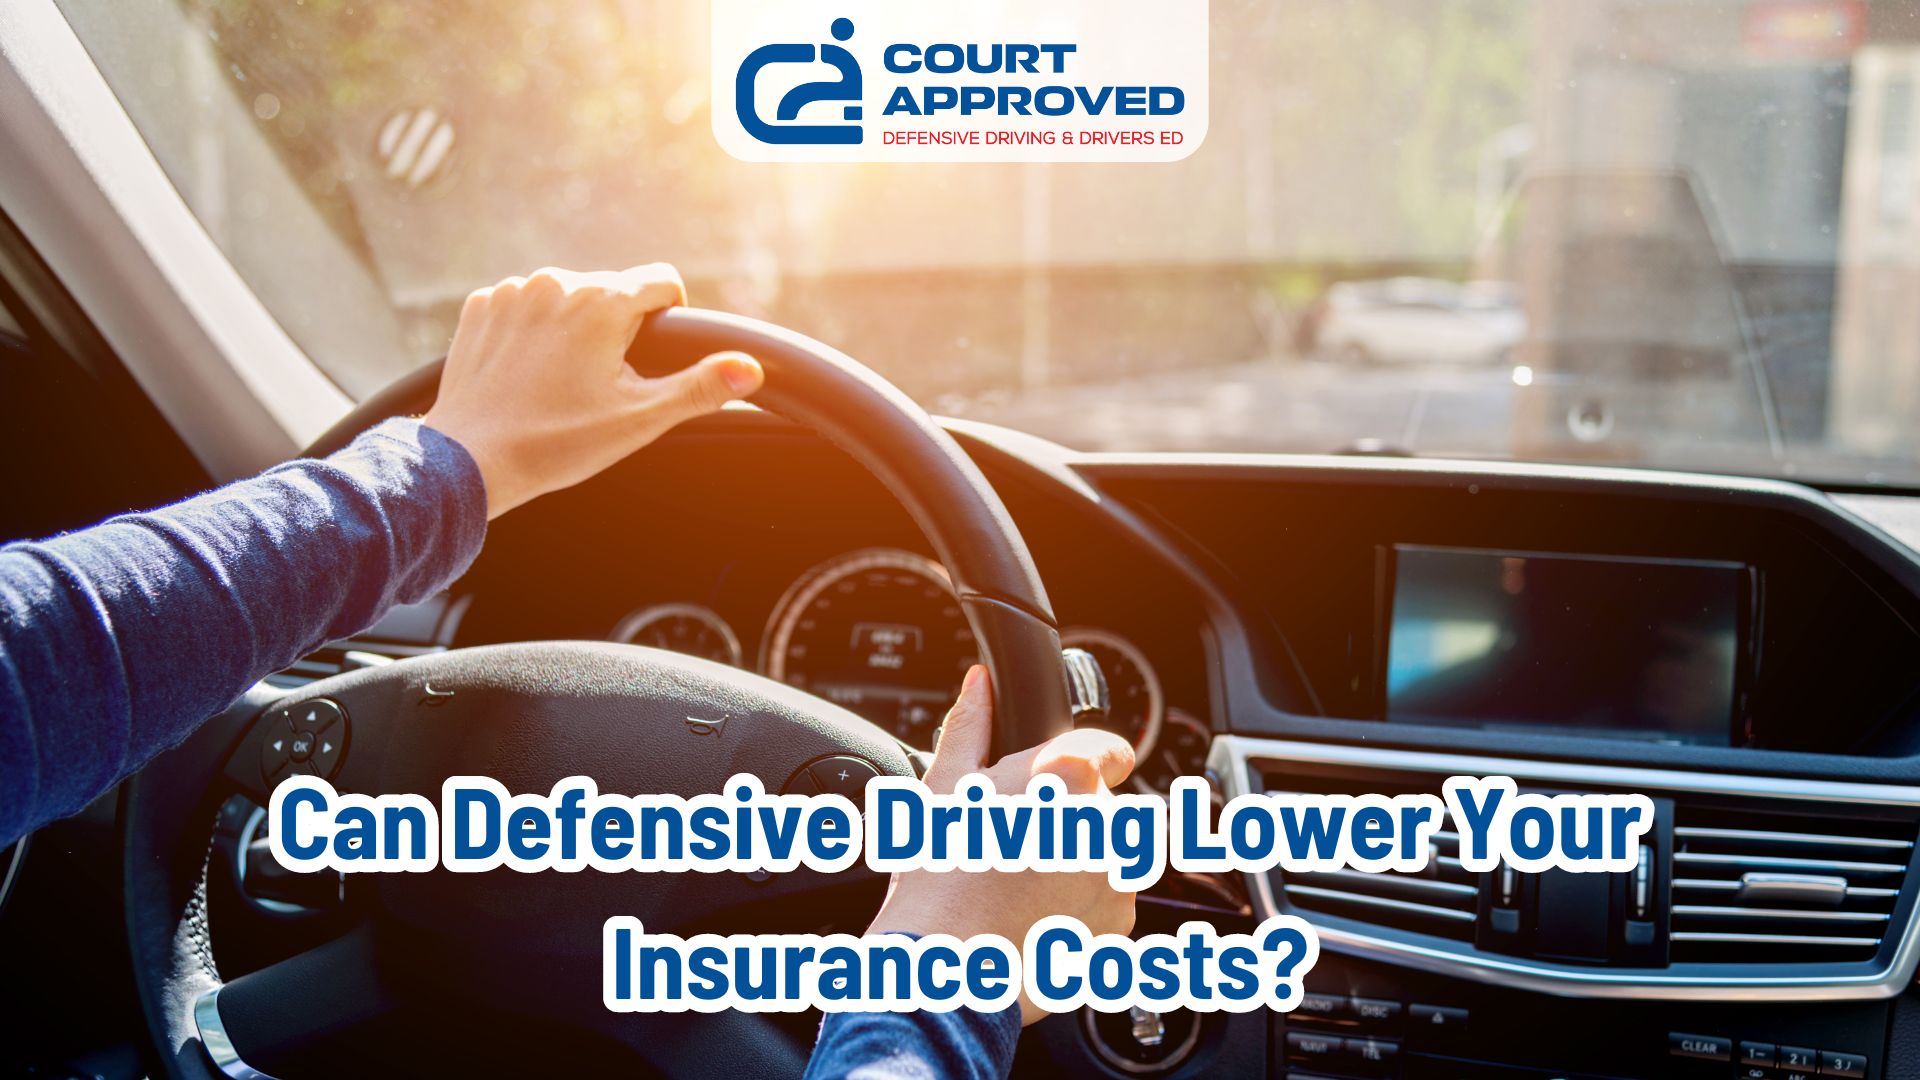 Can Defensive Driving Lower Your Insurance Costs?